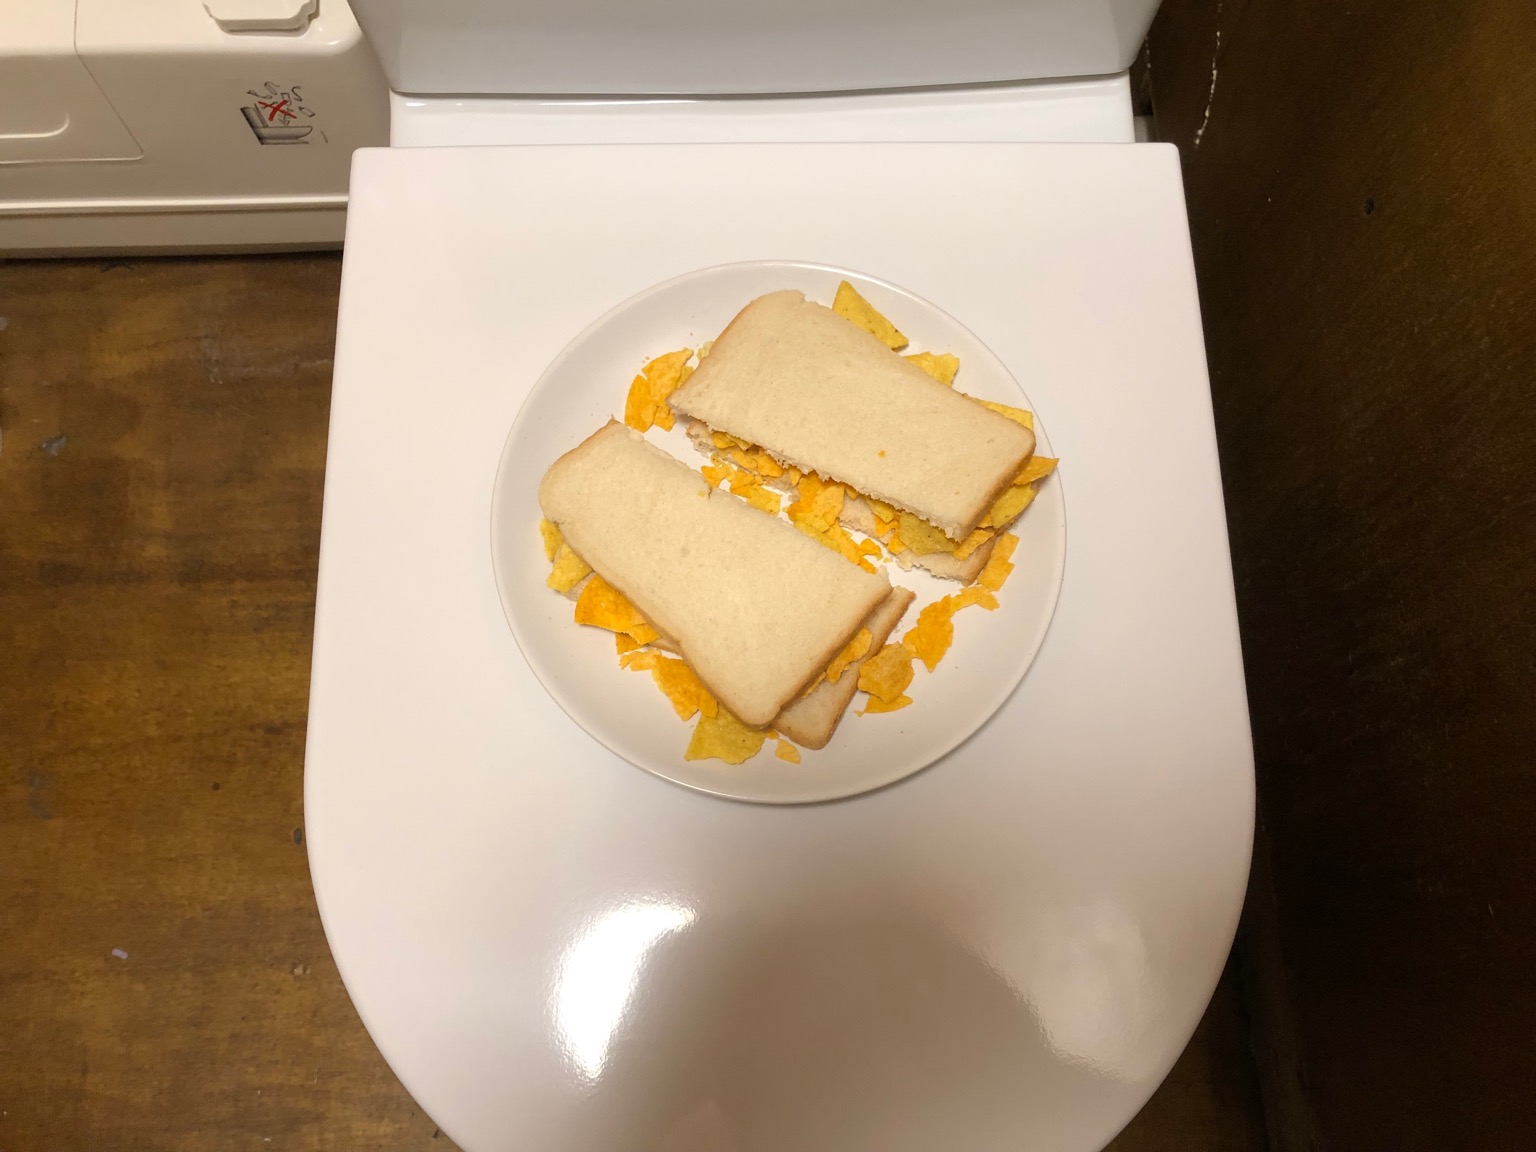 Doritos in white sliced bread placed on a toilet seat